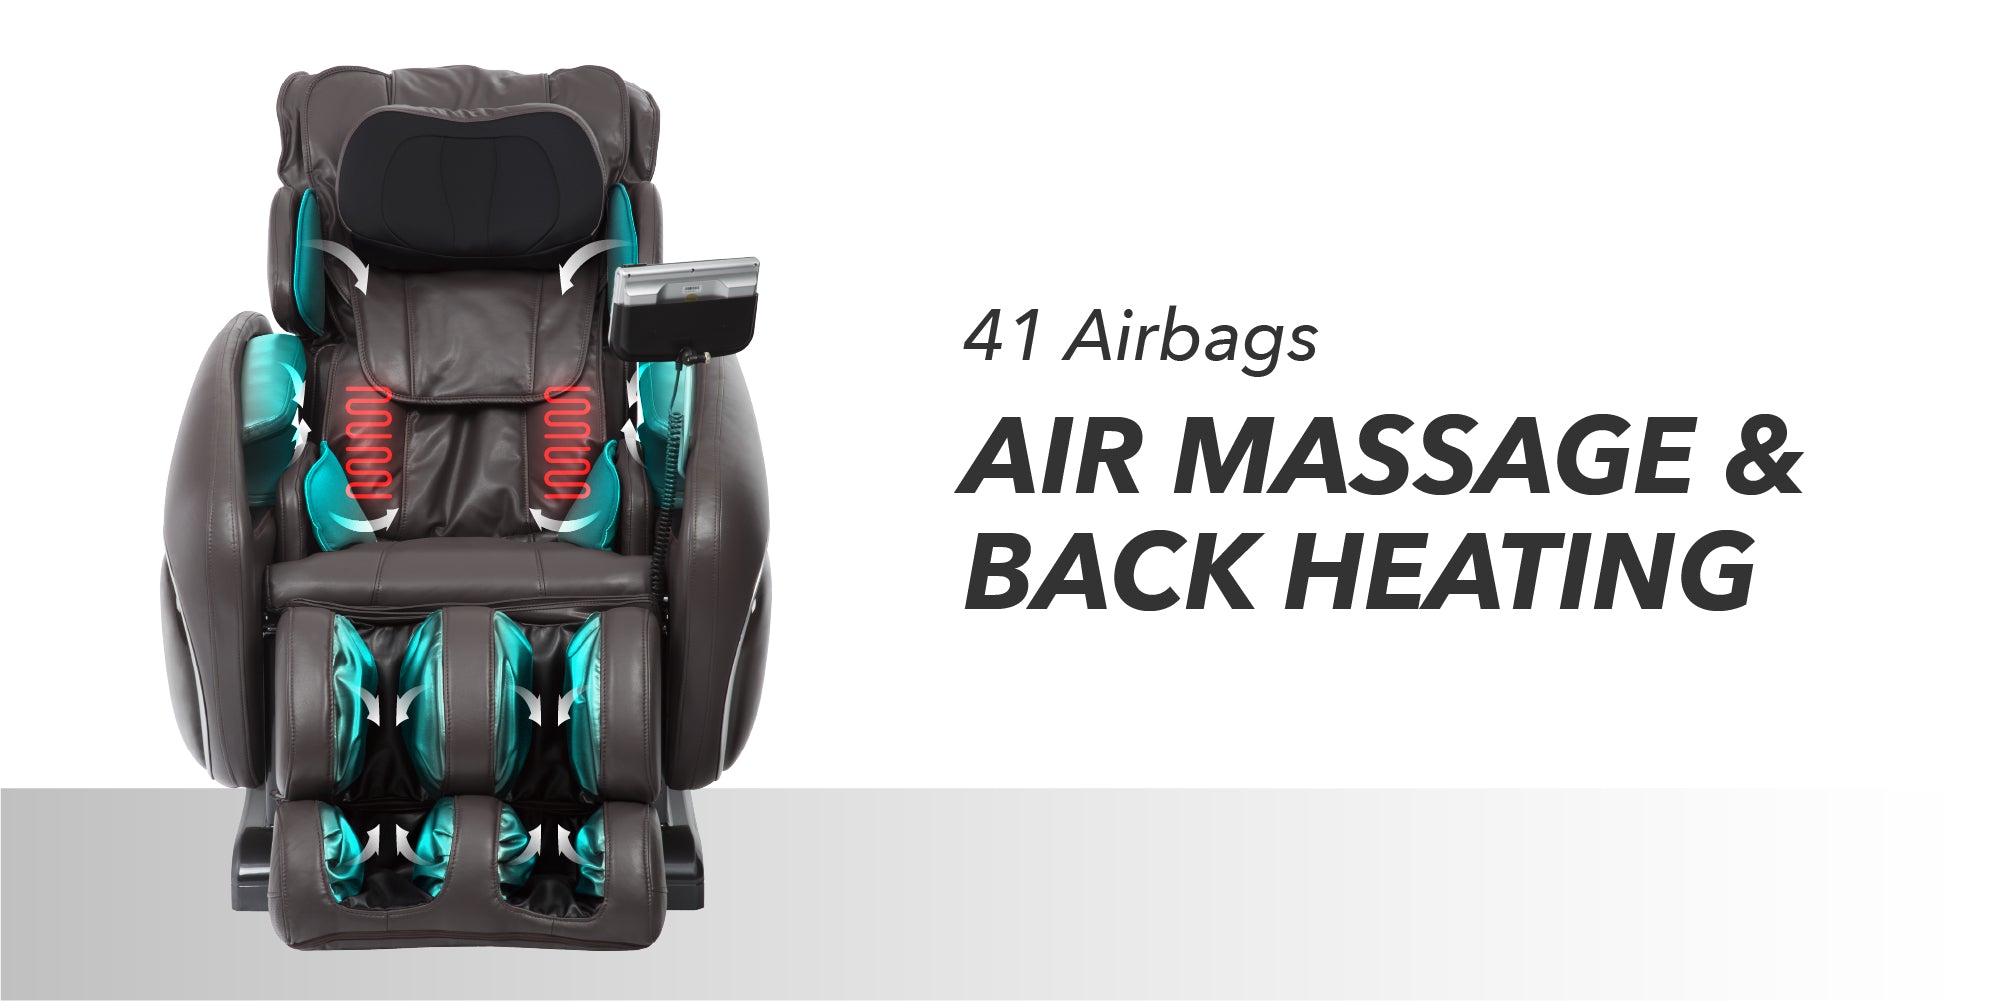 41 Airbags Air Massage & Back Heating